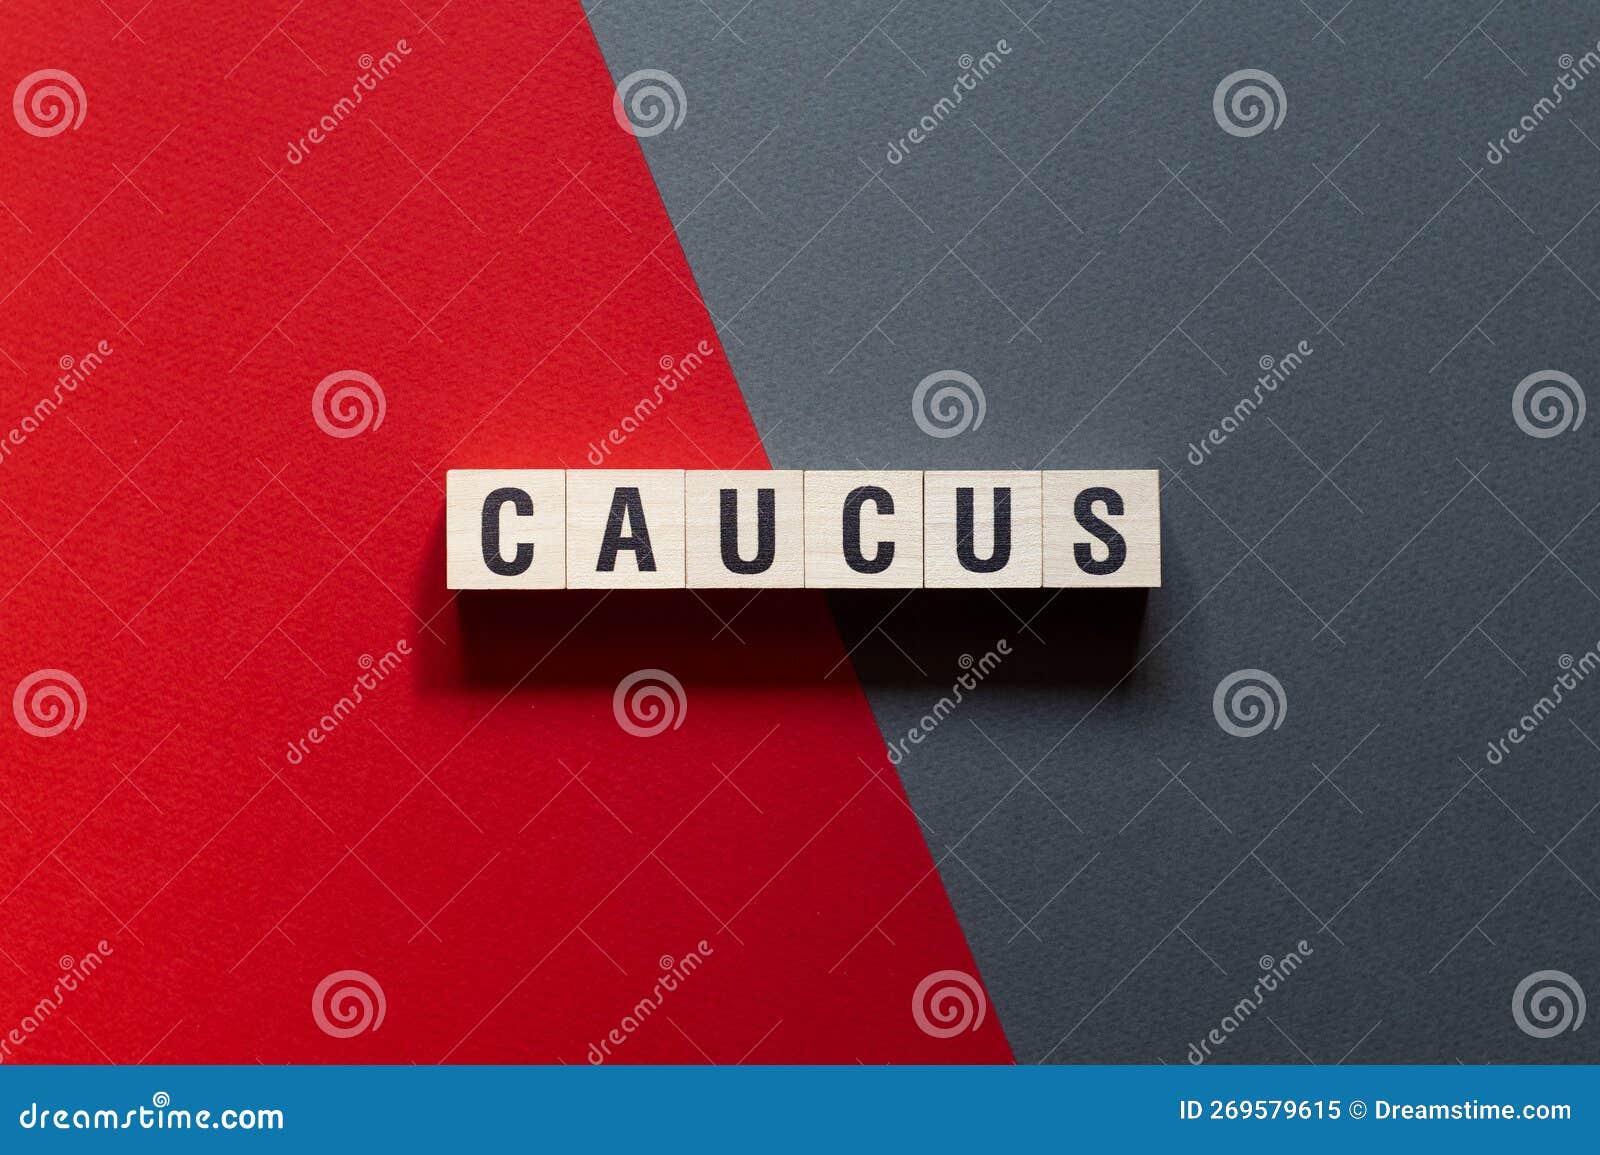 caucus - word concept on cubes